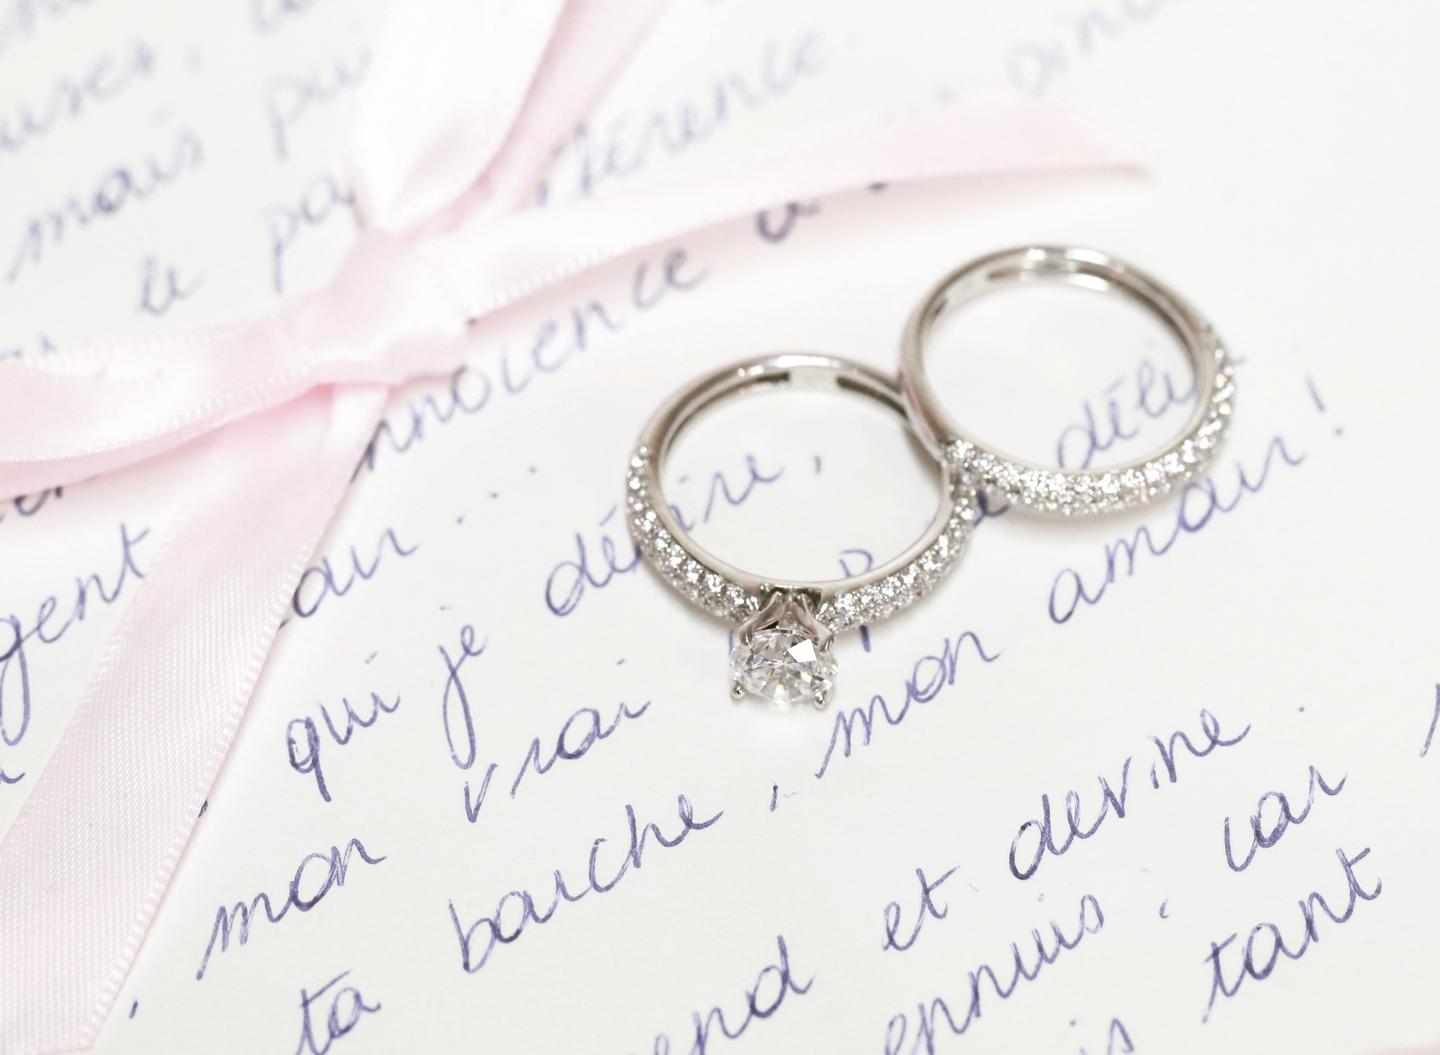 Tips on how to pick the right engagement ring